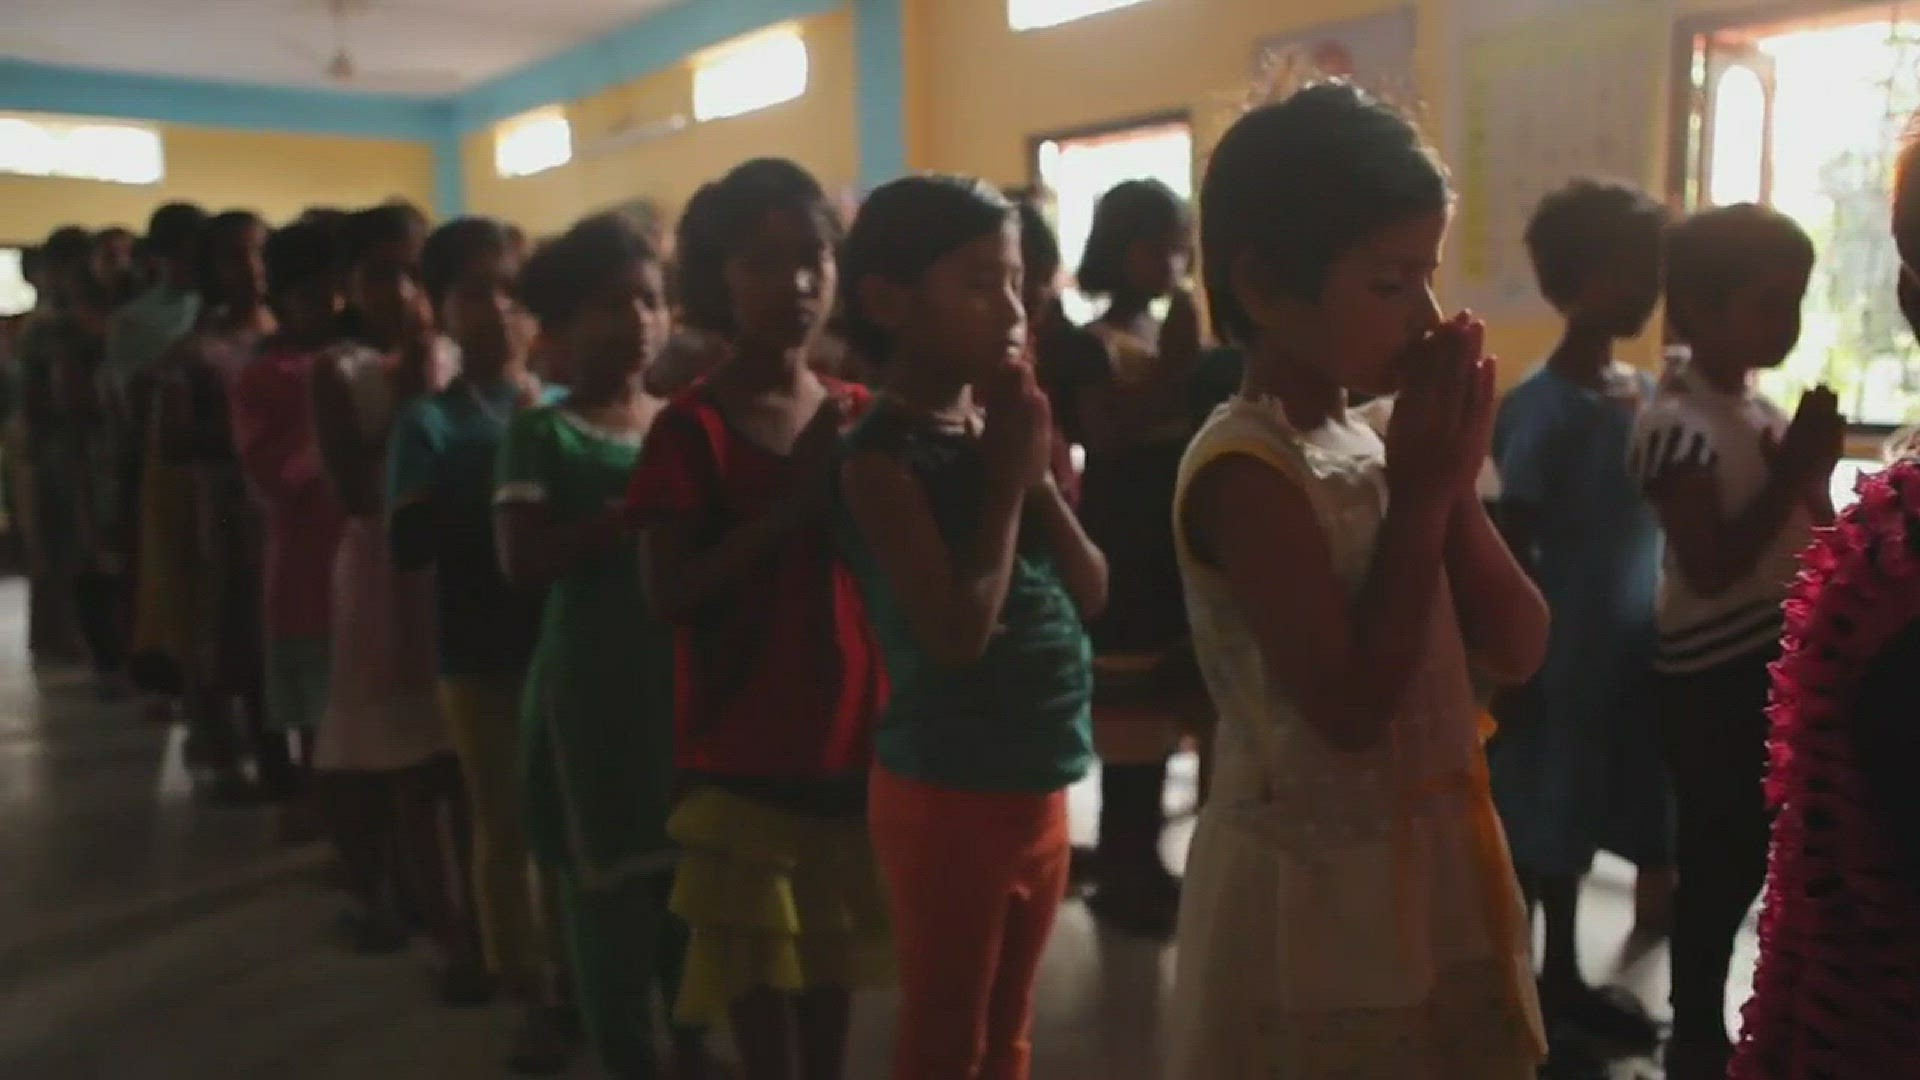 The Miracle Foundation works to improve lives of abandoned children in India.